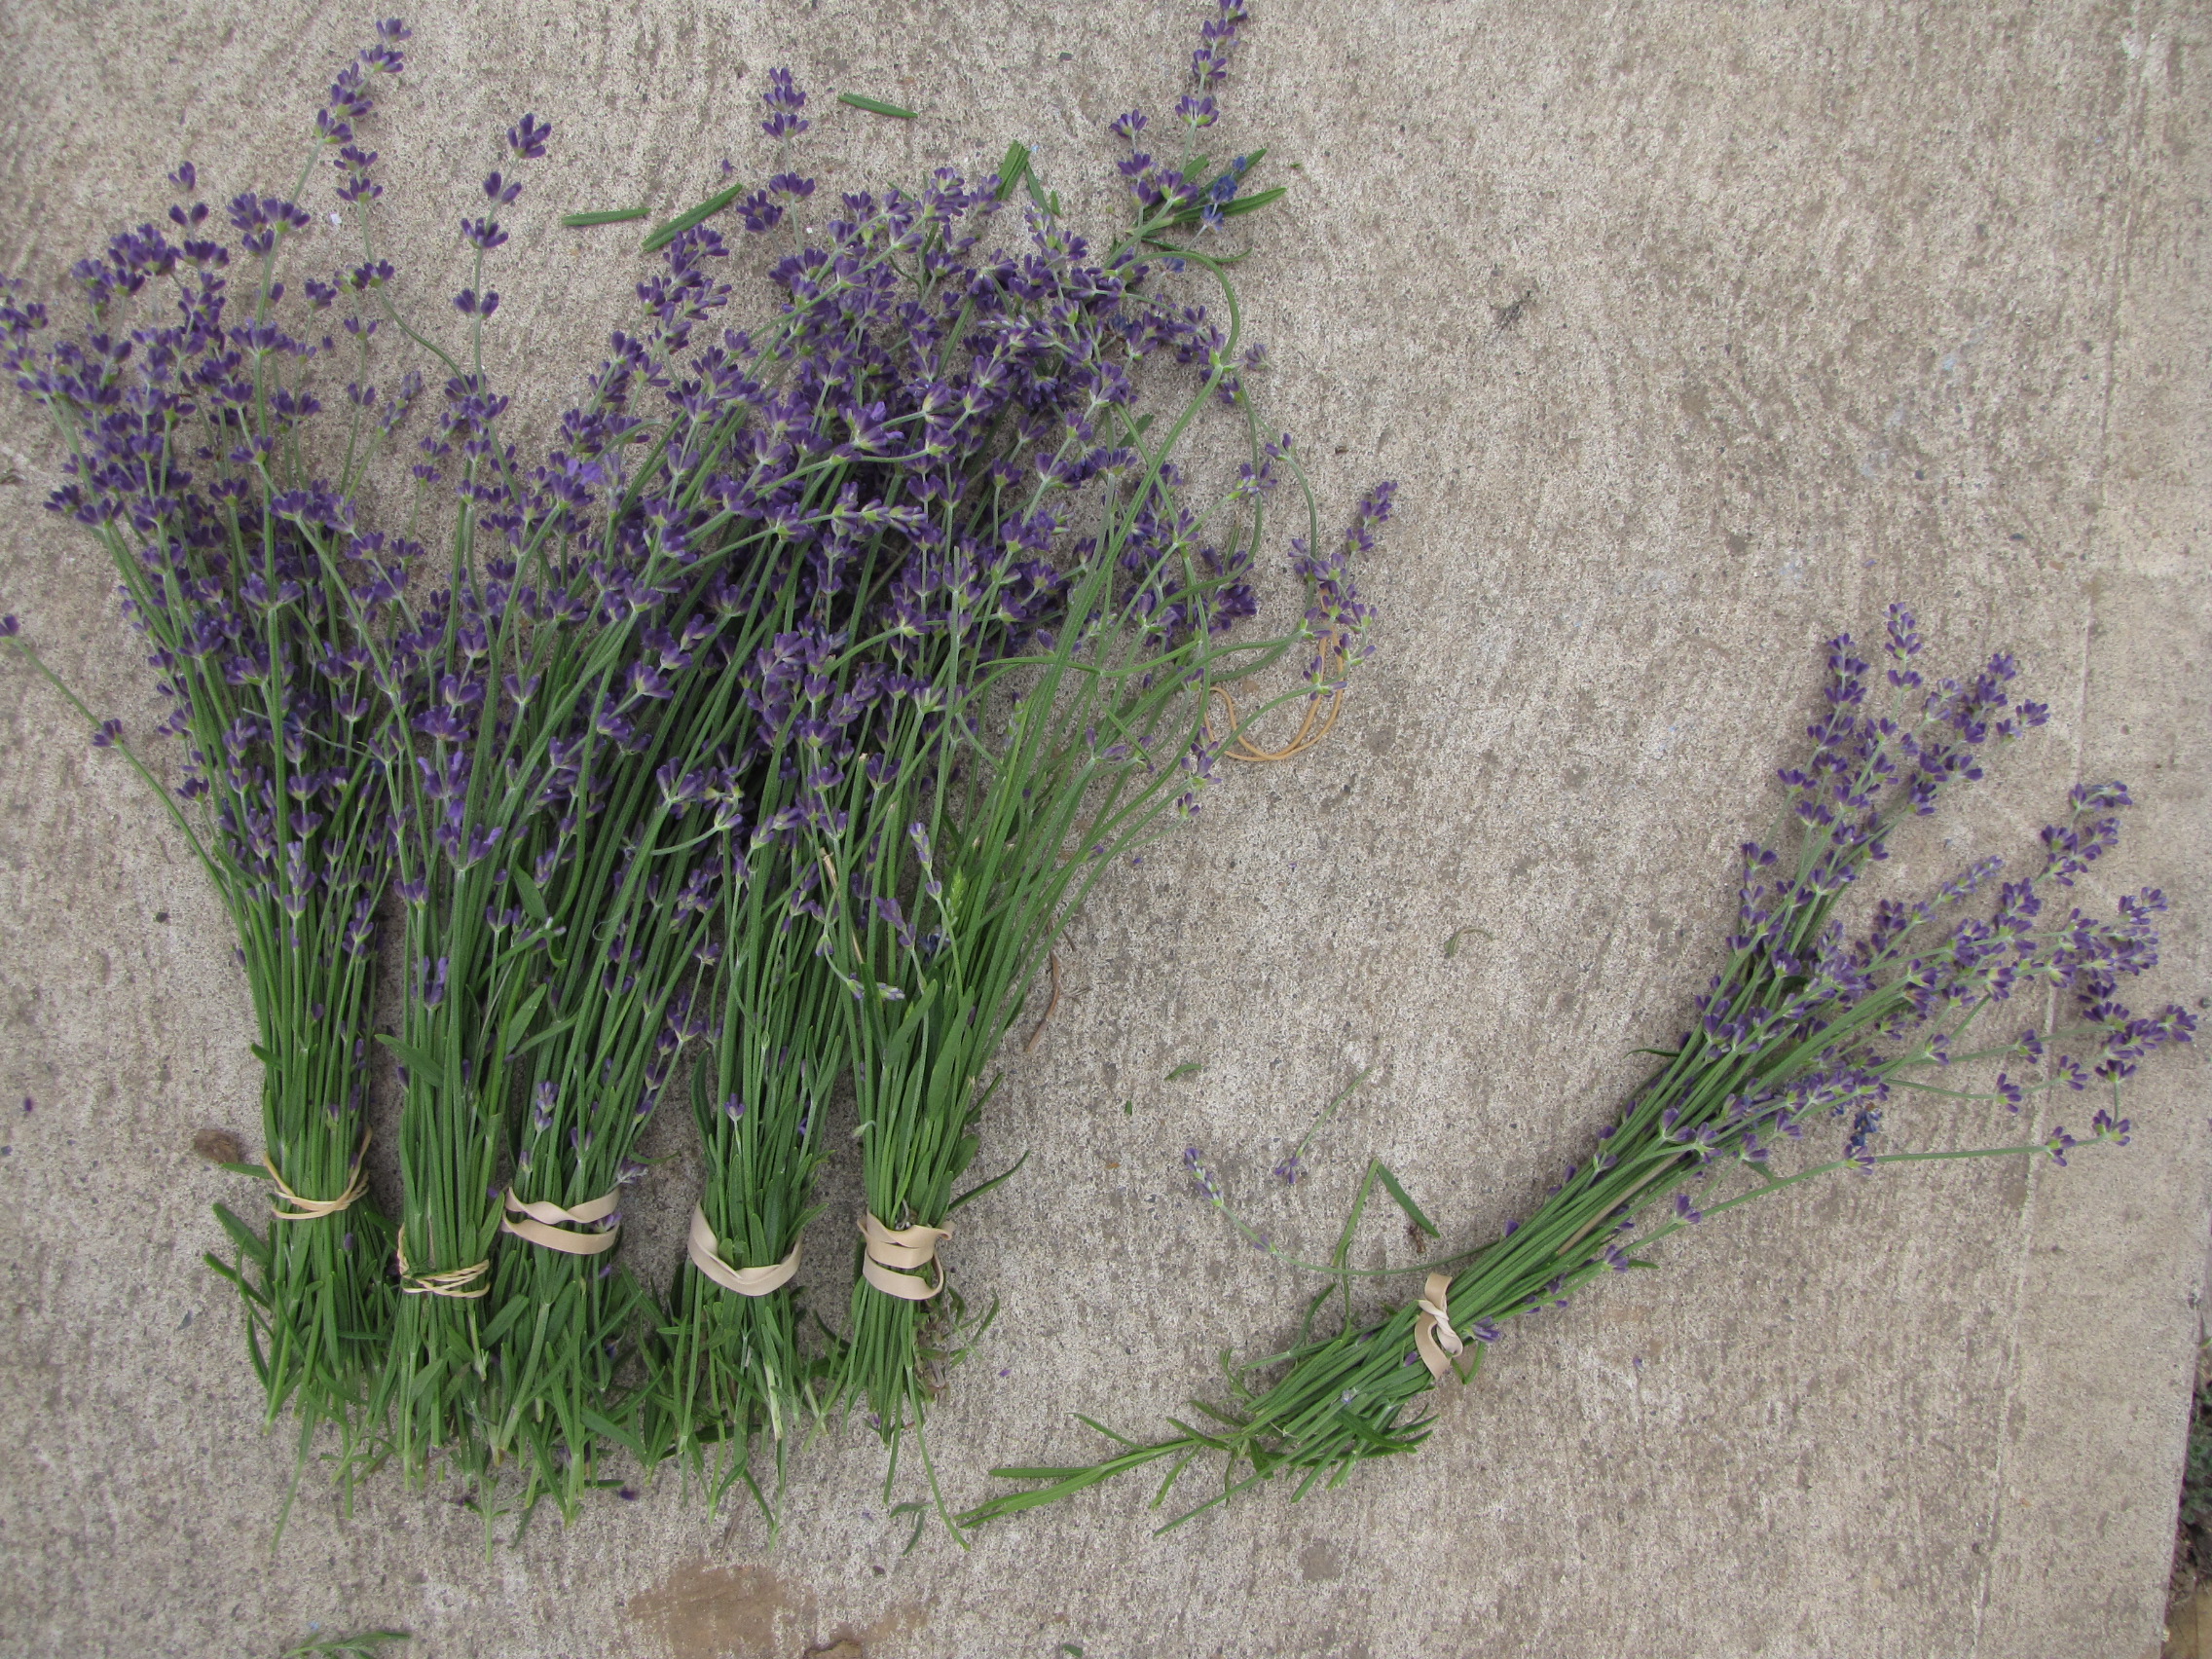 Culinary lavendar.  I love harvesting it, with the bees buzzing all around.